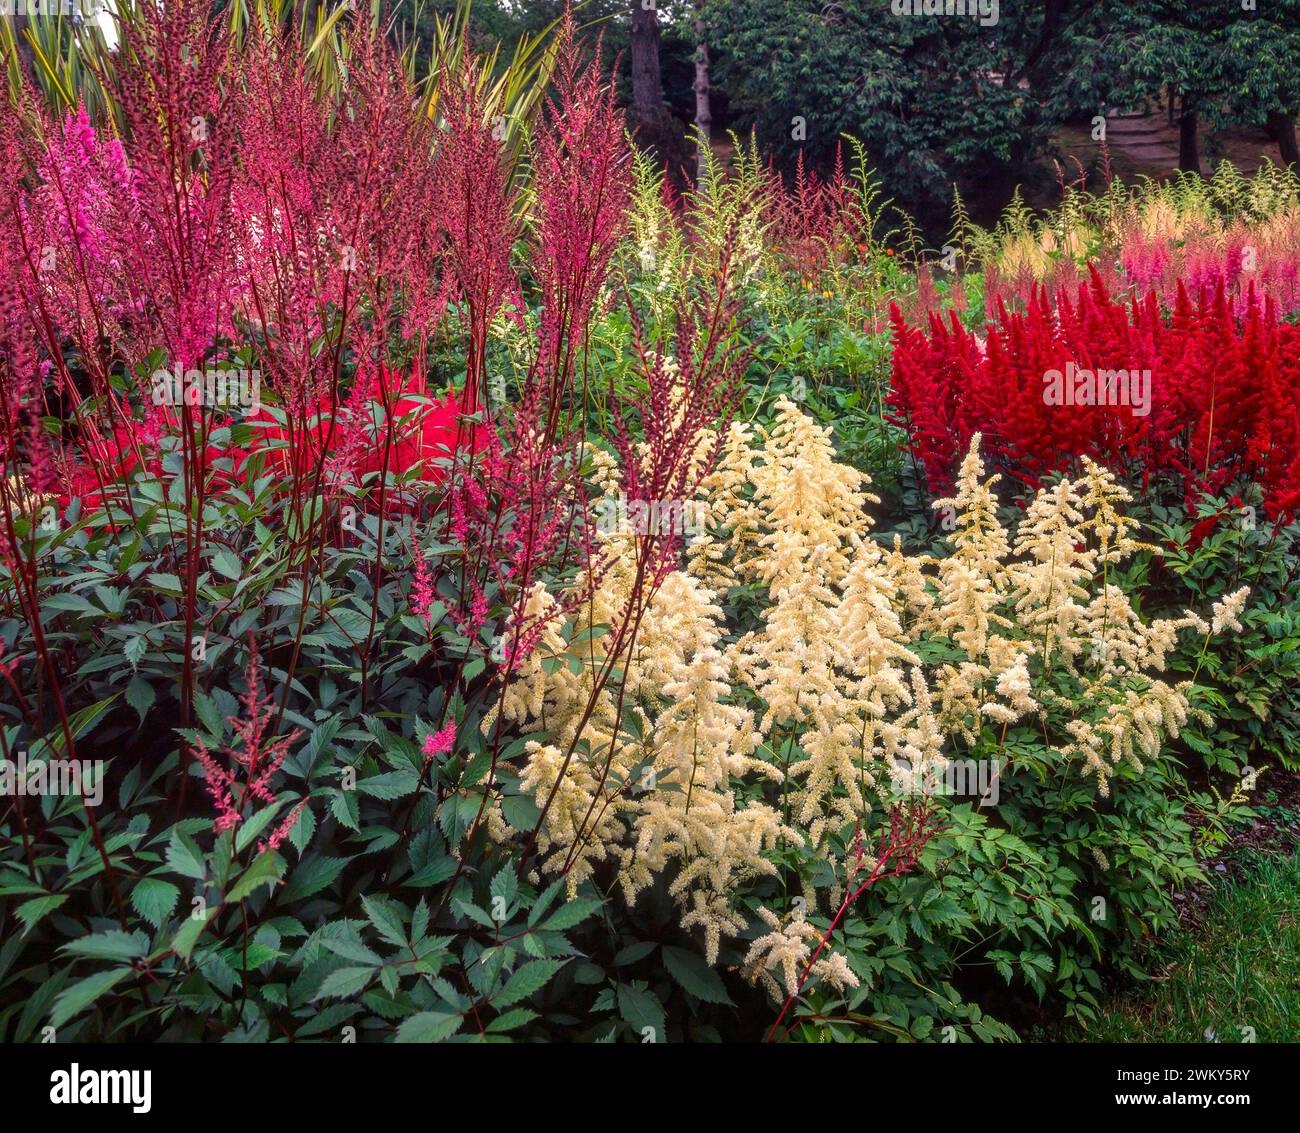 A colourful display of purple, red and cream Astilbe flowers in the National Astilbe collection in Marwood Gardens in the 1990s, Devon, England, UK Stock Photo